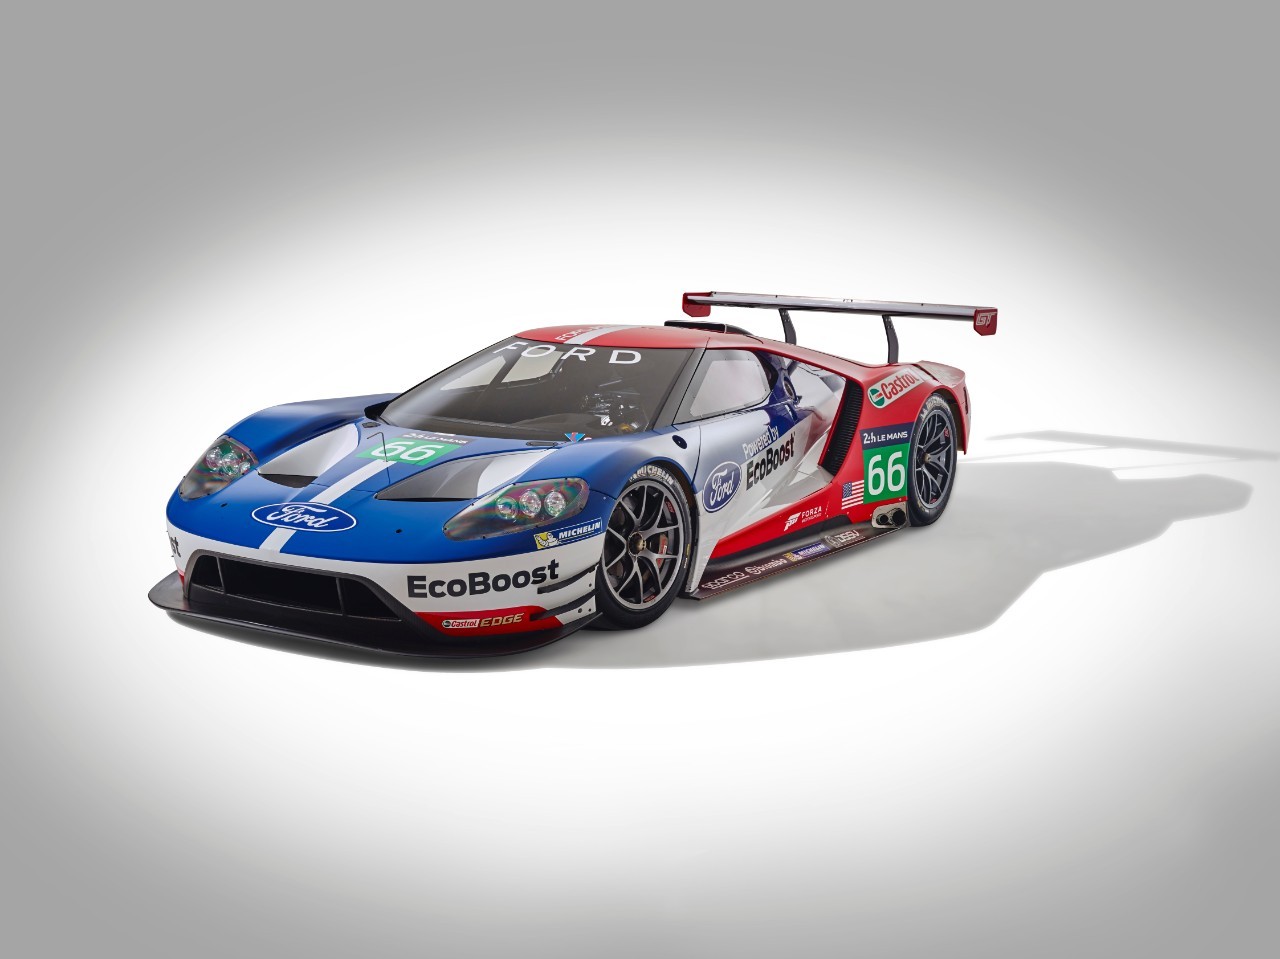 ford-gt-le-mans-racecar-confirmed-to-debut-at-the-2016-rolex-24-at-daytona-video-photo-gallery_5.jpg